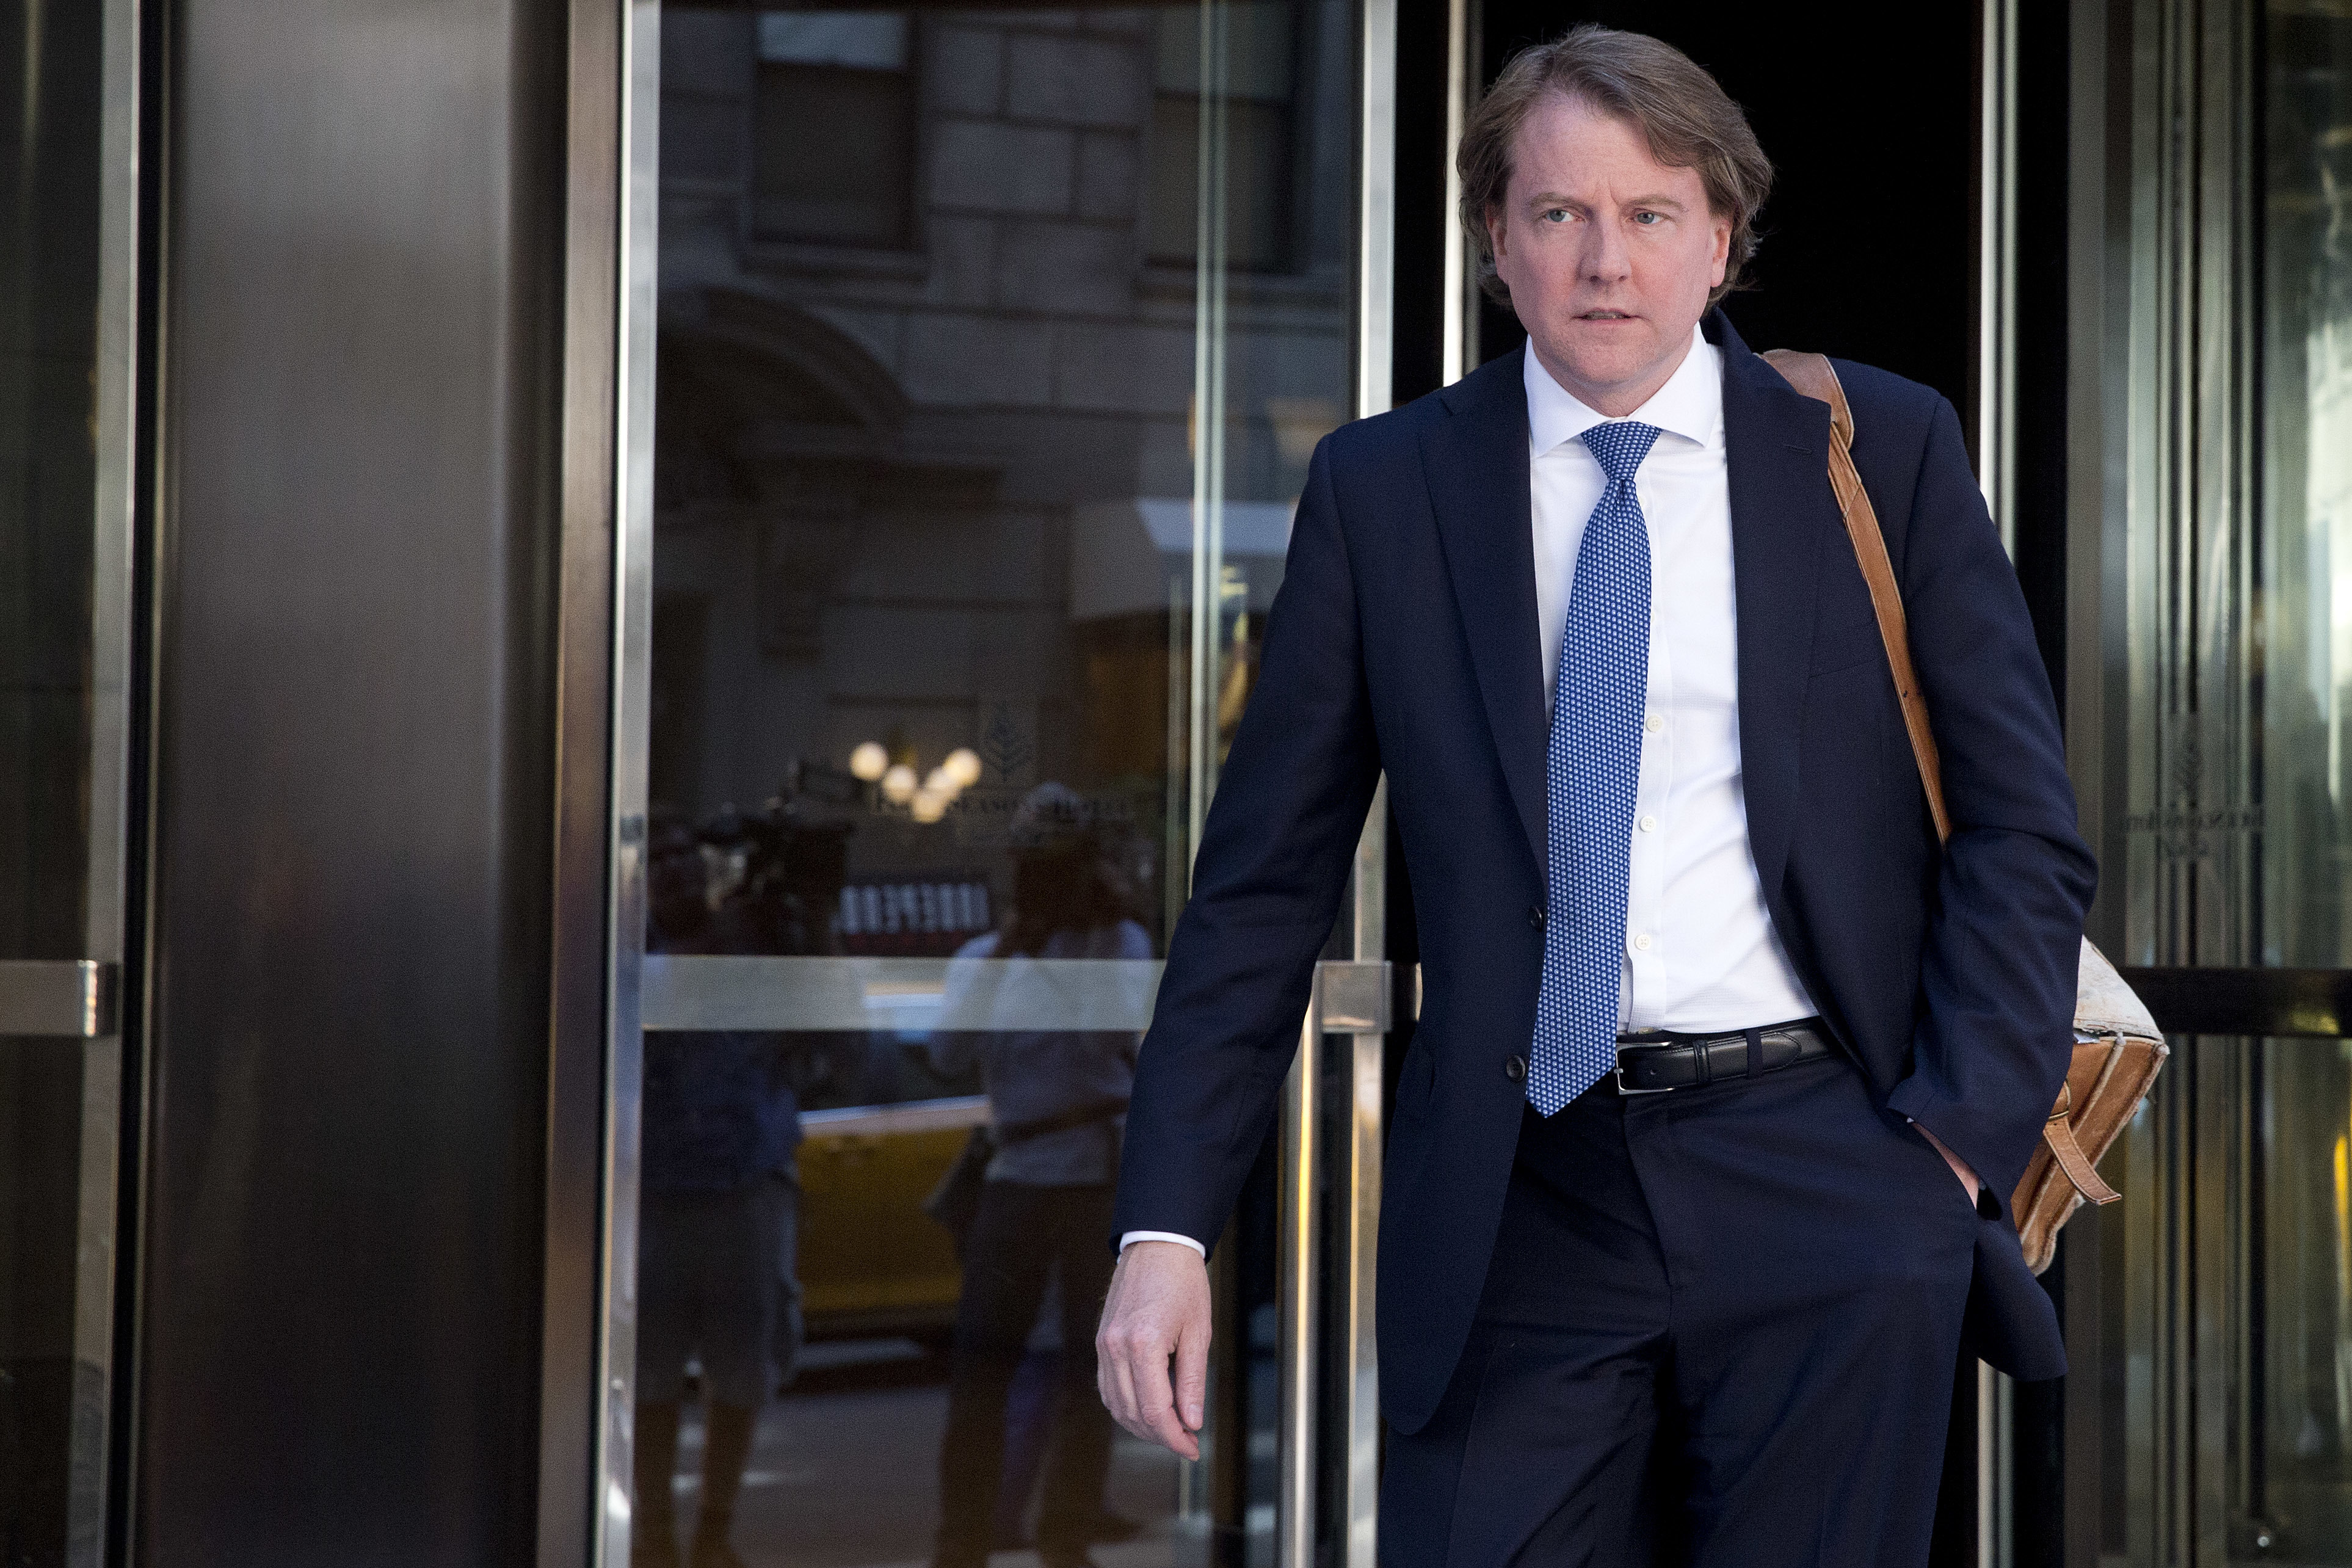 Attorney Donald McGahn leaves the Four Seasons hotel in New York, June 9, 2016, after a GOP fundraiser. (Mary Altaffer—AP)